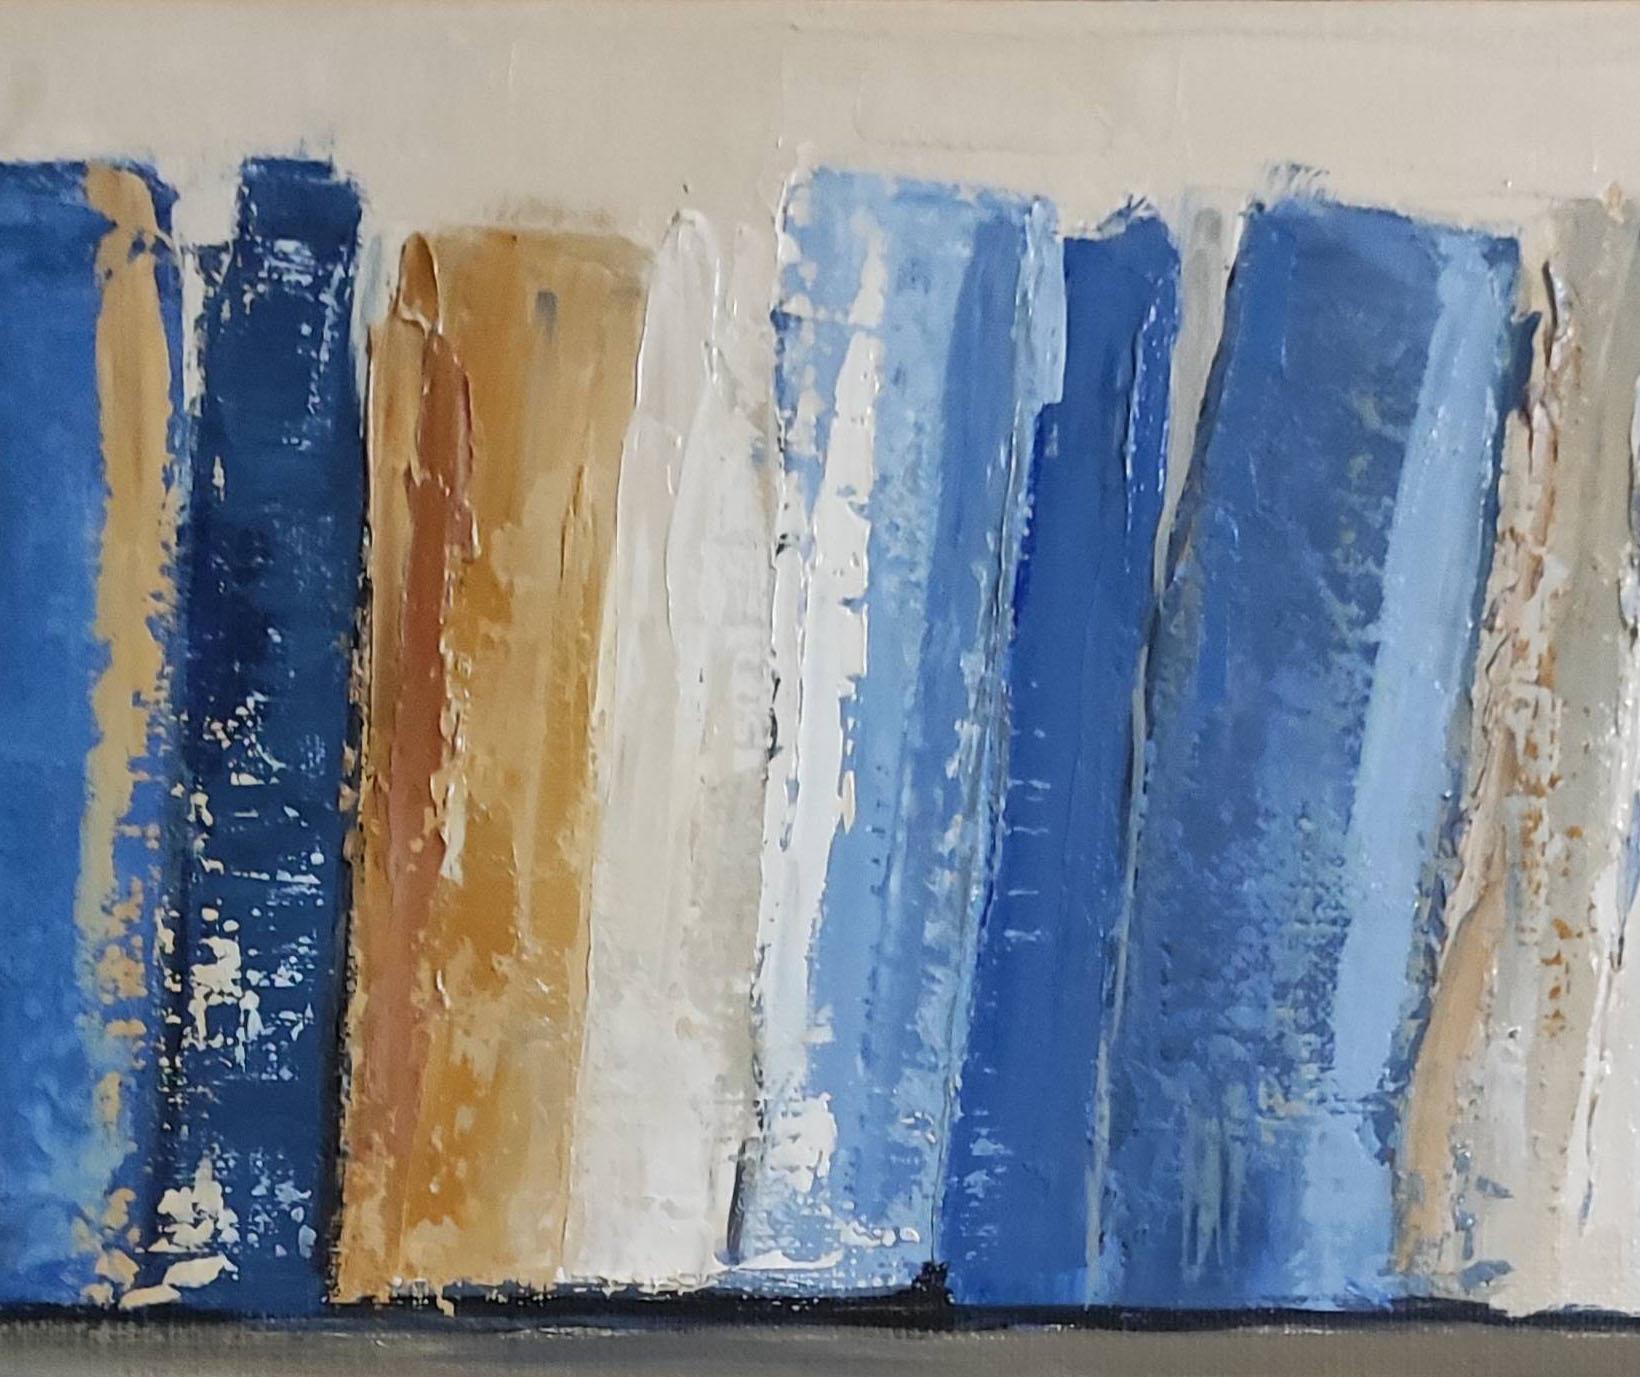 les recueils, blue abstract library, oil on canvas, textured, minimalism, modern 2